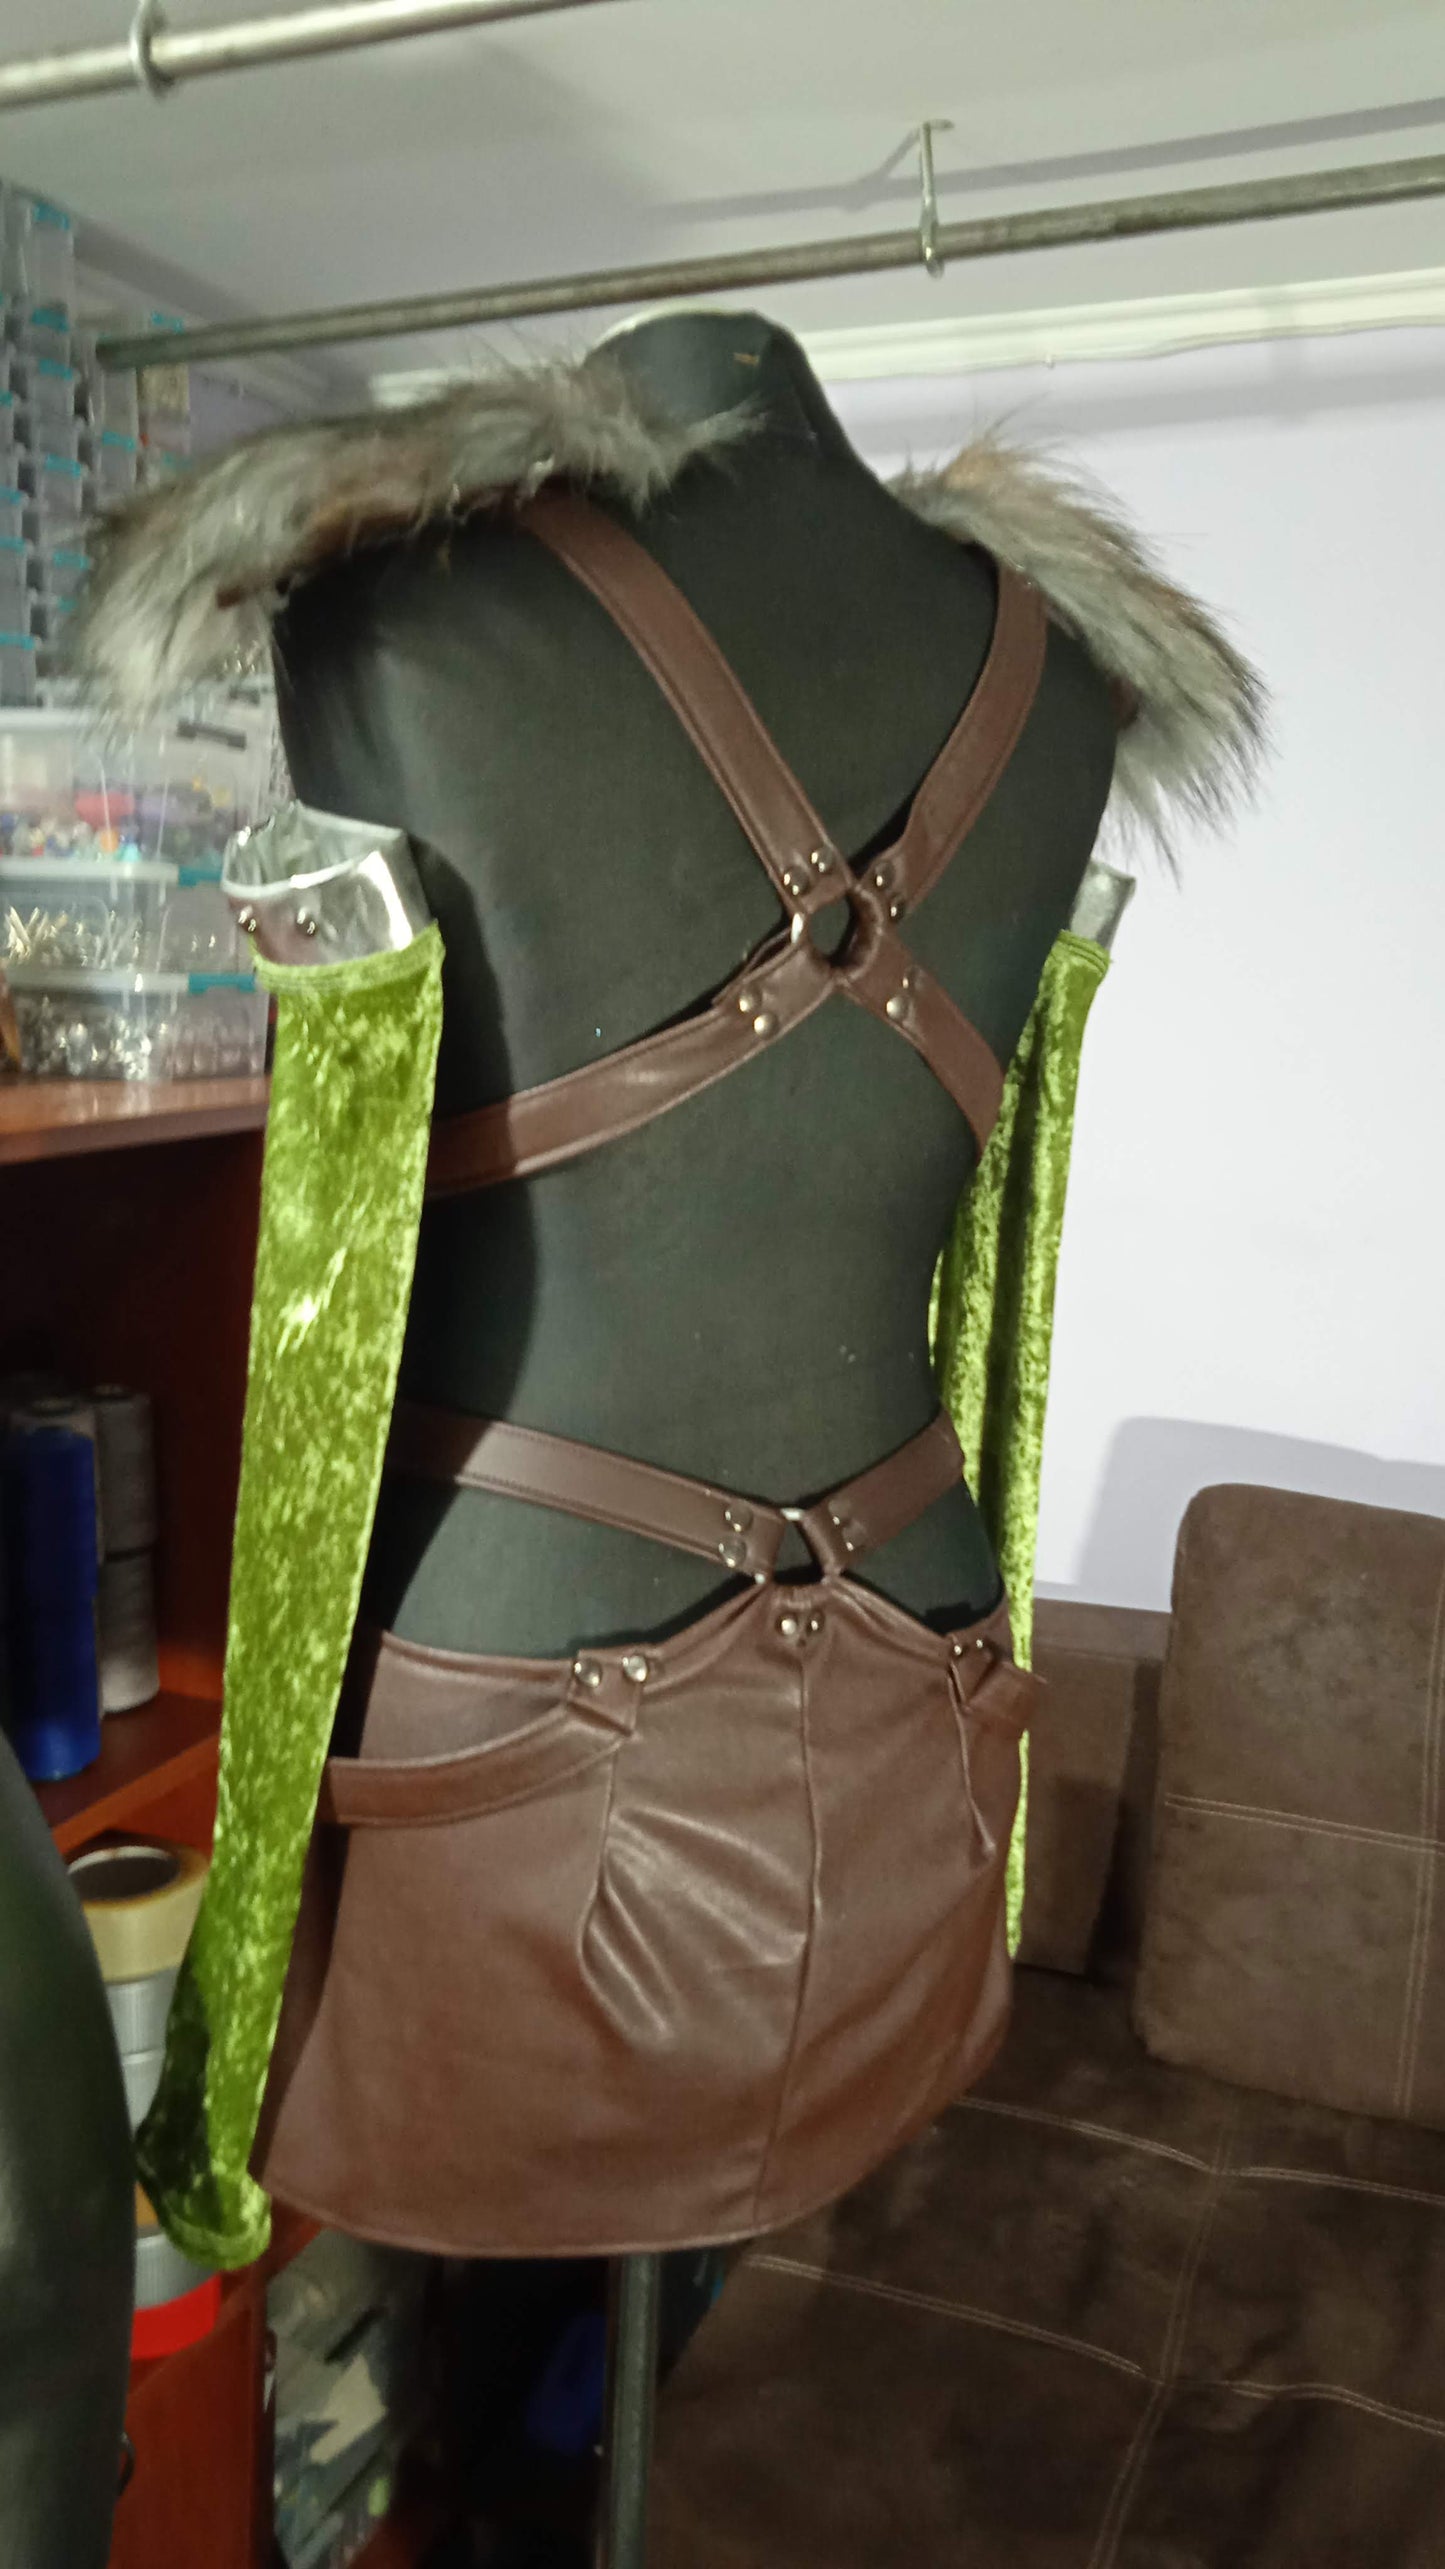 Aela the Huntress / Skyrim game cosplay outfit